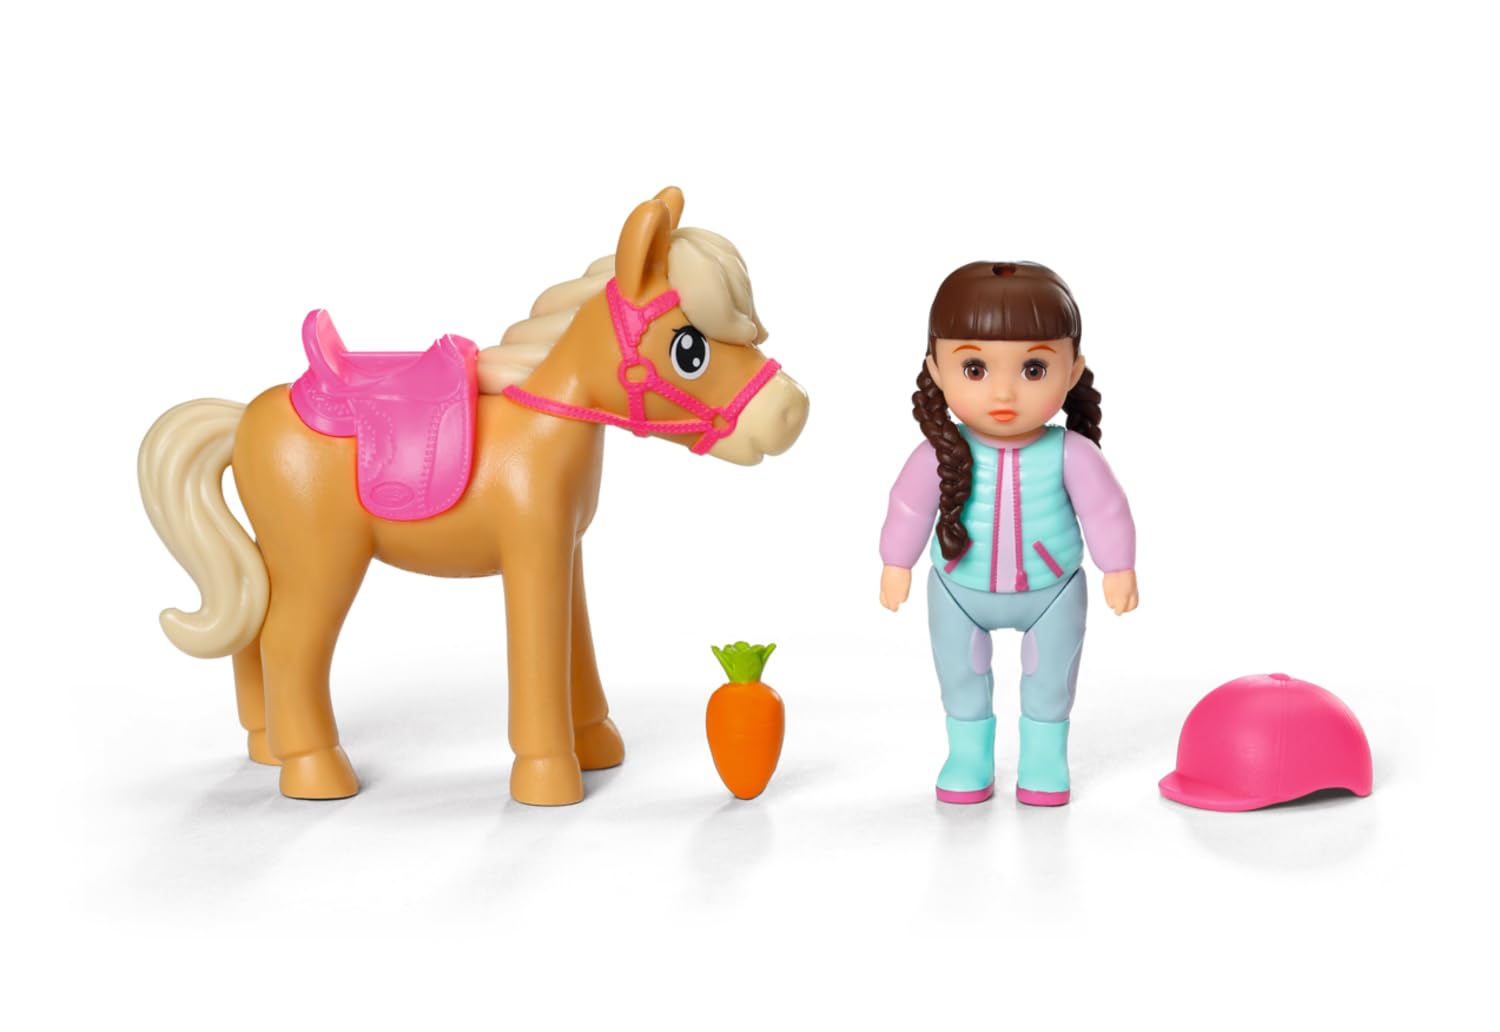 BABY born Minis Playset Horse Club Set with Kim 906149 - 7cm Doll with Exclusive Accessories and Moveable Body for Realistic Play - Suitable for Kids From 3+ Years